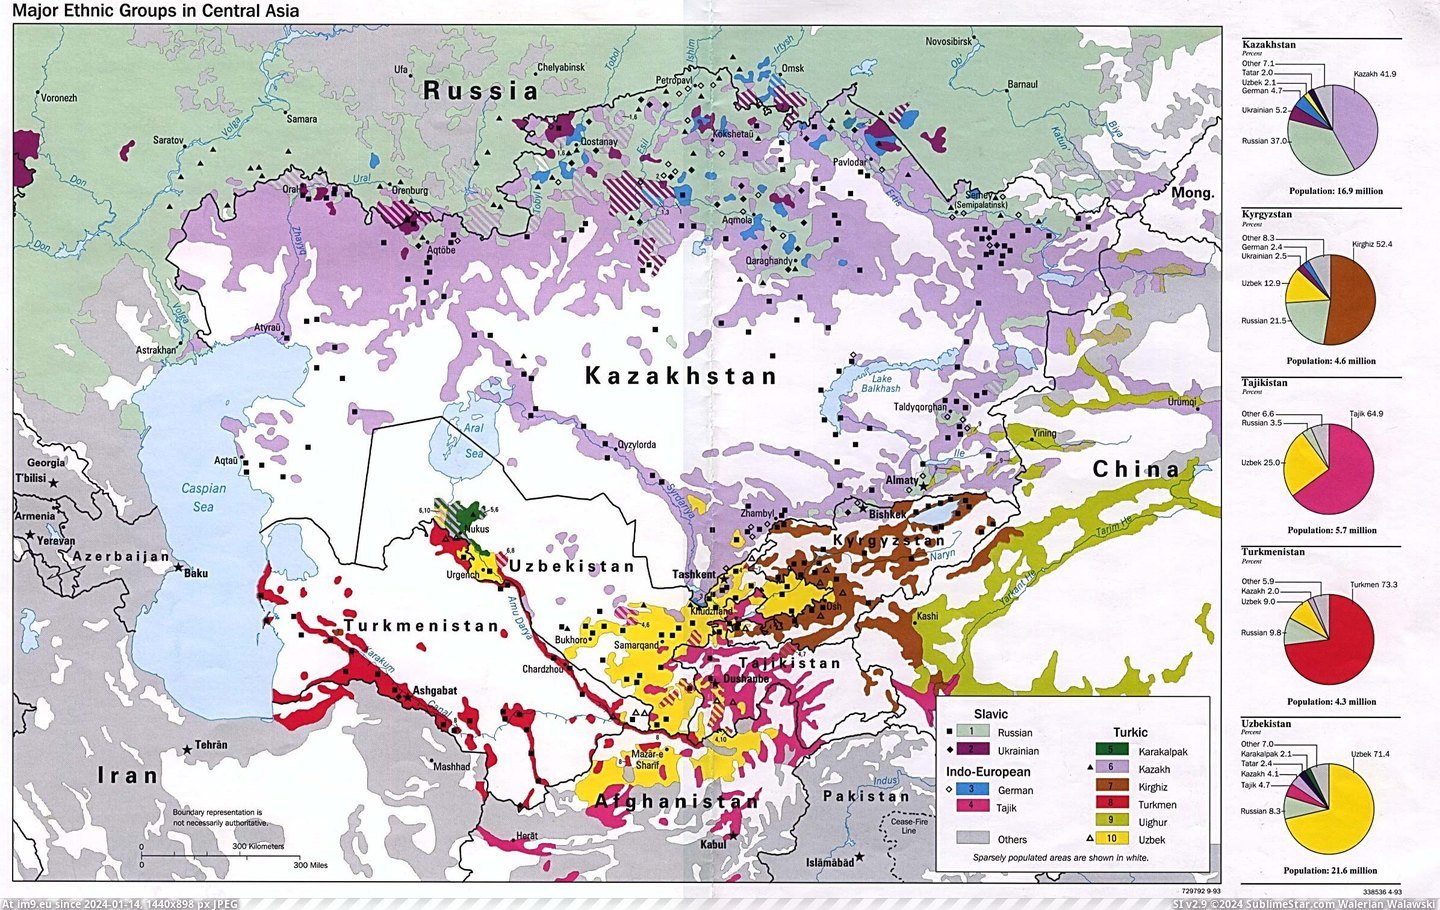 #Major #Asia #Groups #Central #Ethnic [Mapporn] Major Ethnic Groups in Central Asia [2392x1504] Pic. (Bild von album My r/MAPS favs))